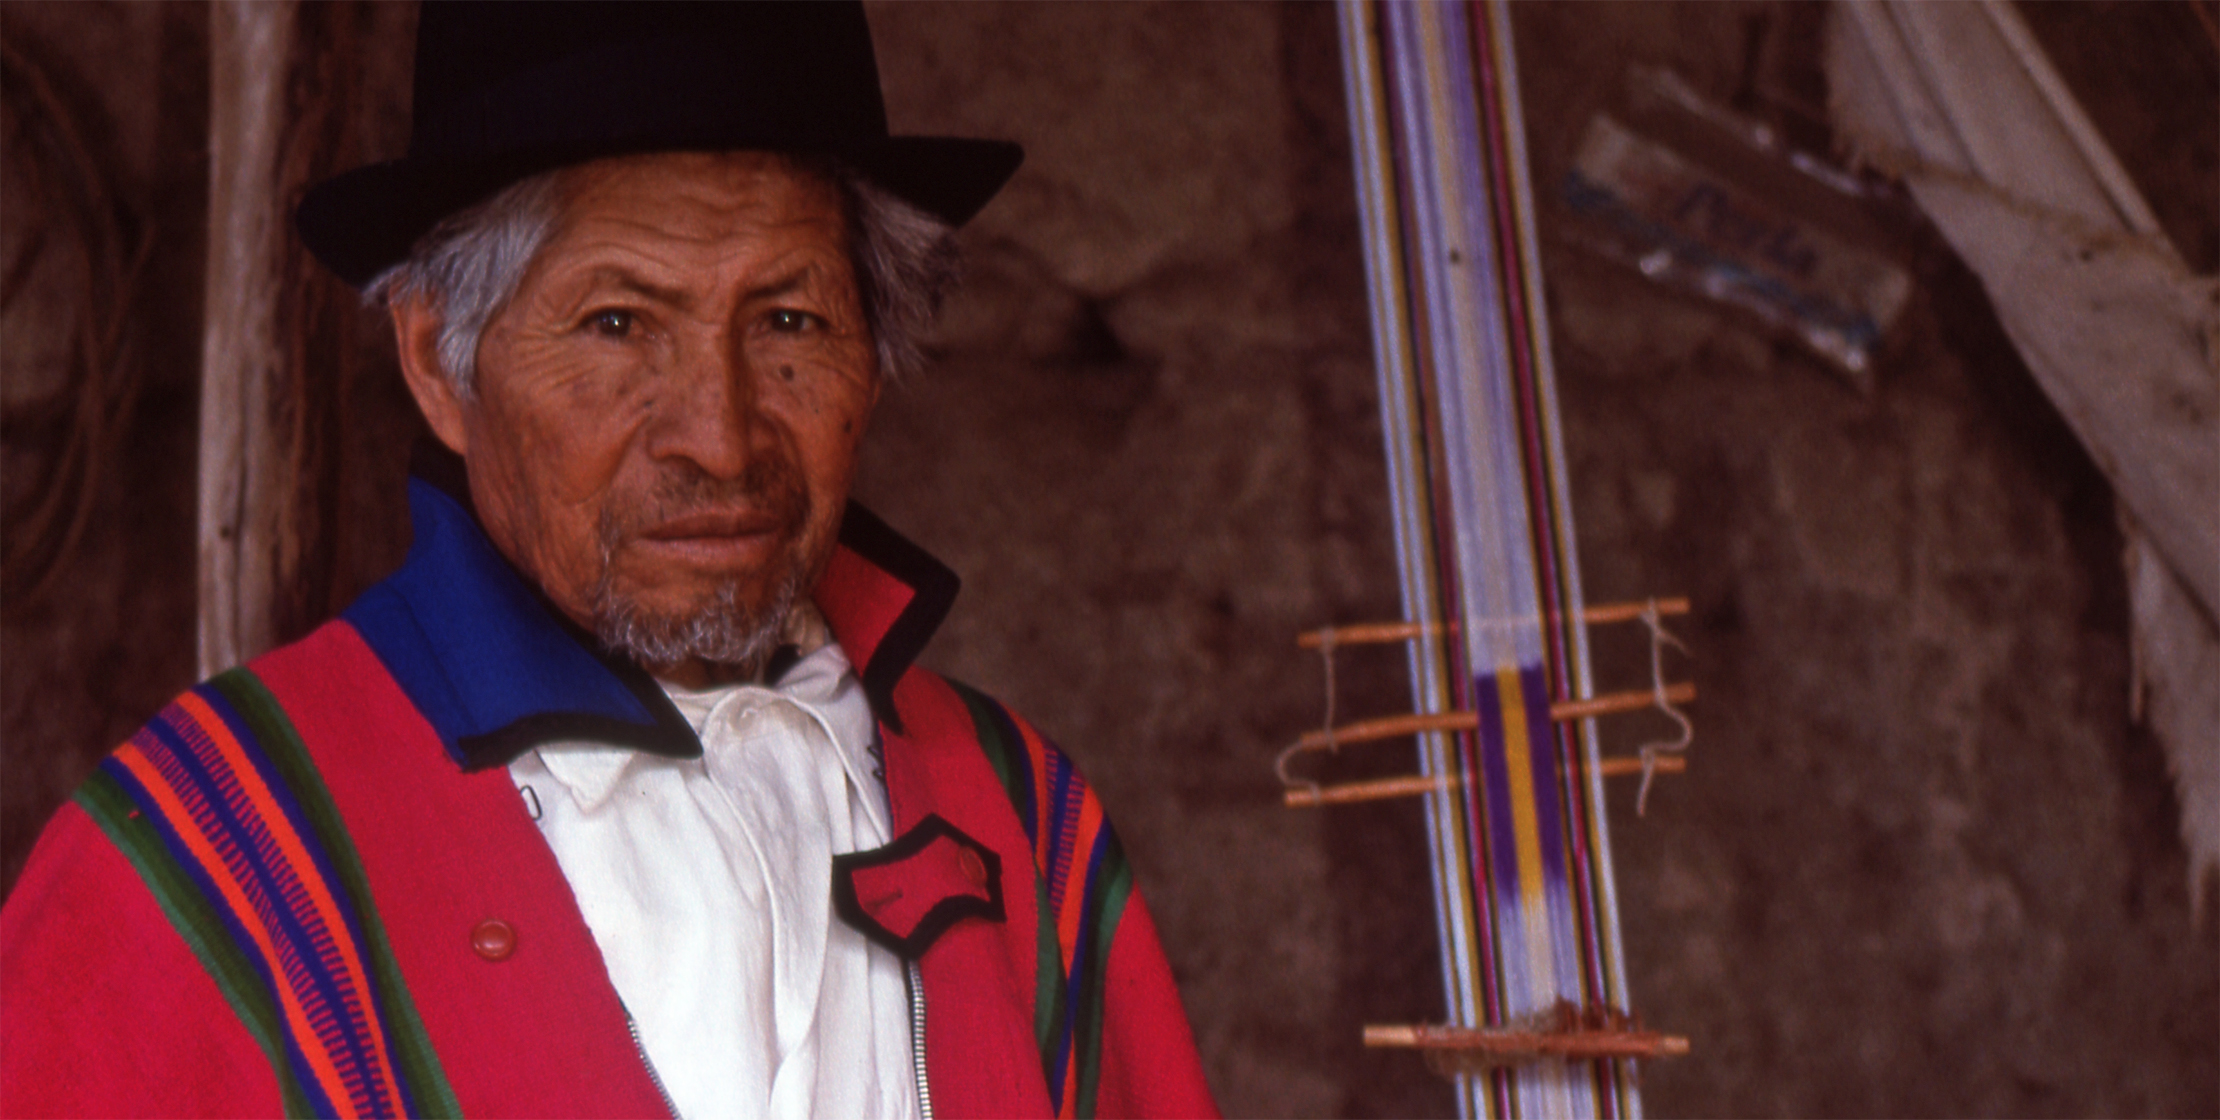 An Ecadudorian weaver in a black hat and traditional red wrap stands next to his loom